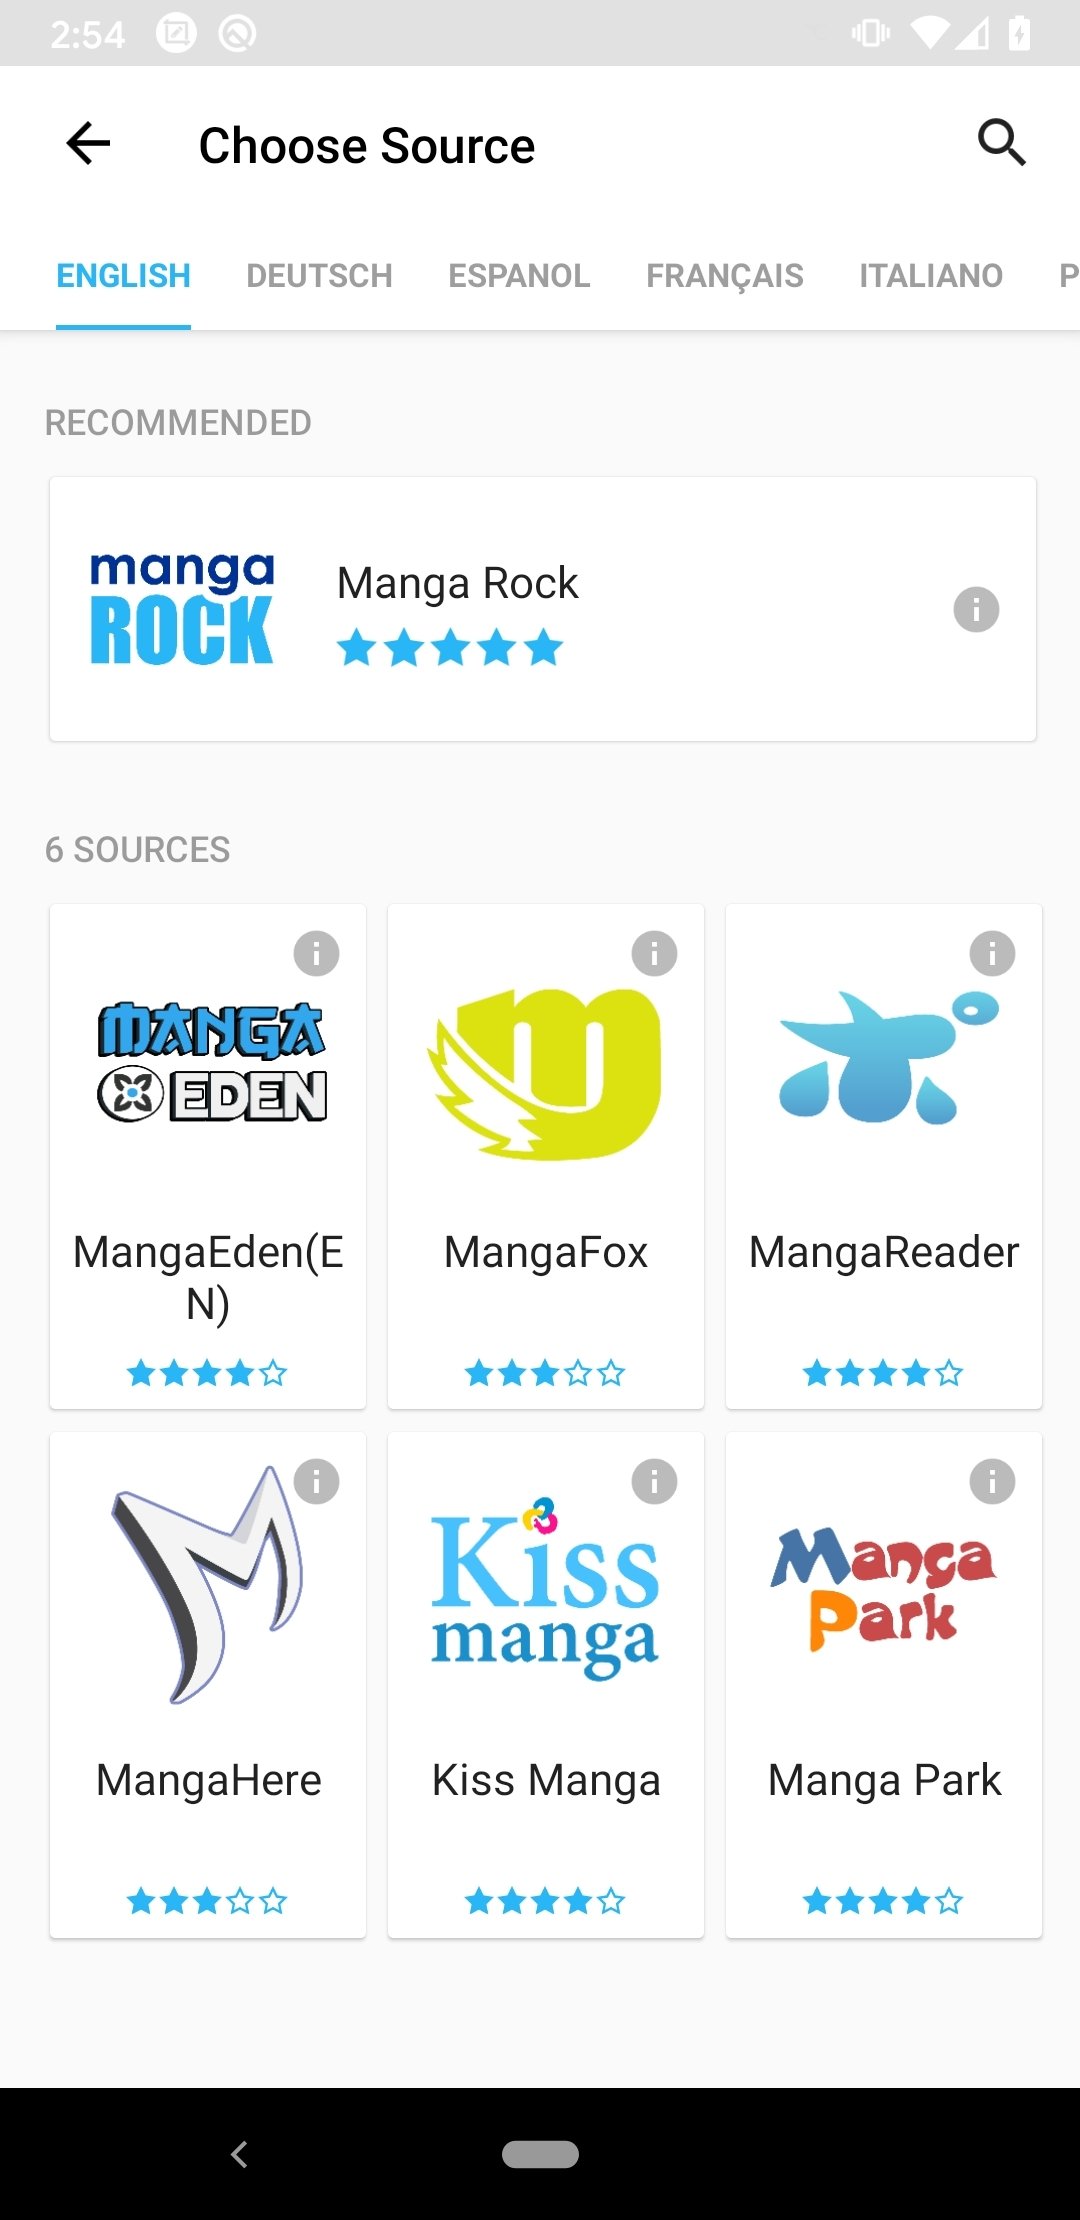 Manga Rock 3.9.12 - Download for Android APK Free